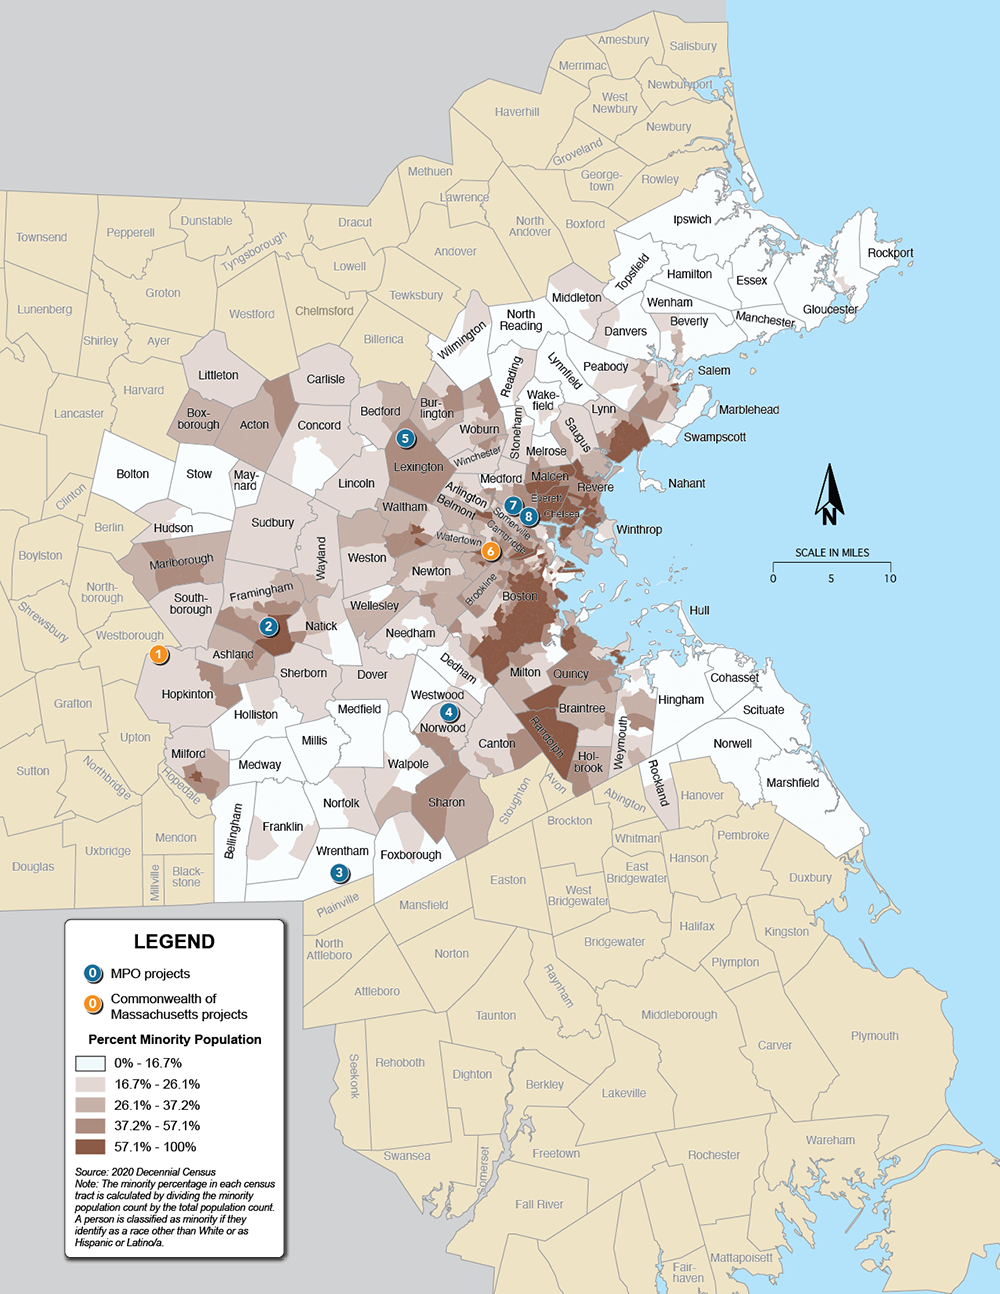 This figure is a map of the Boston region that displays the locations of Recommended Plan projects and census tracts shaded by their share of minority population. 